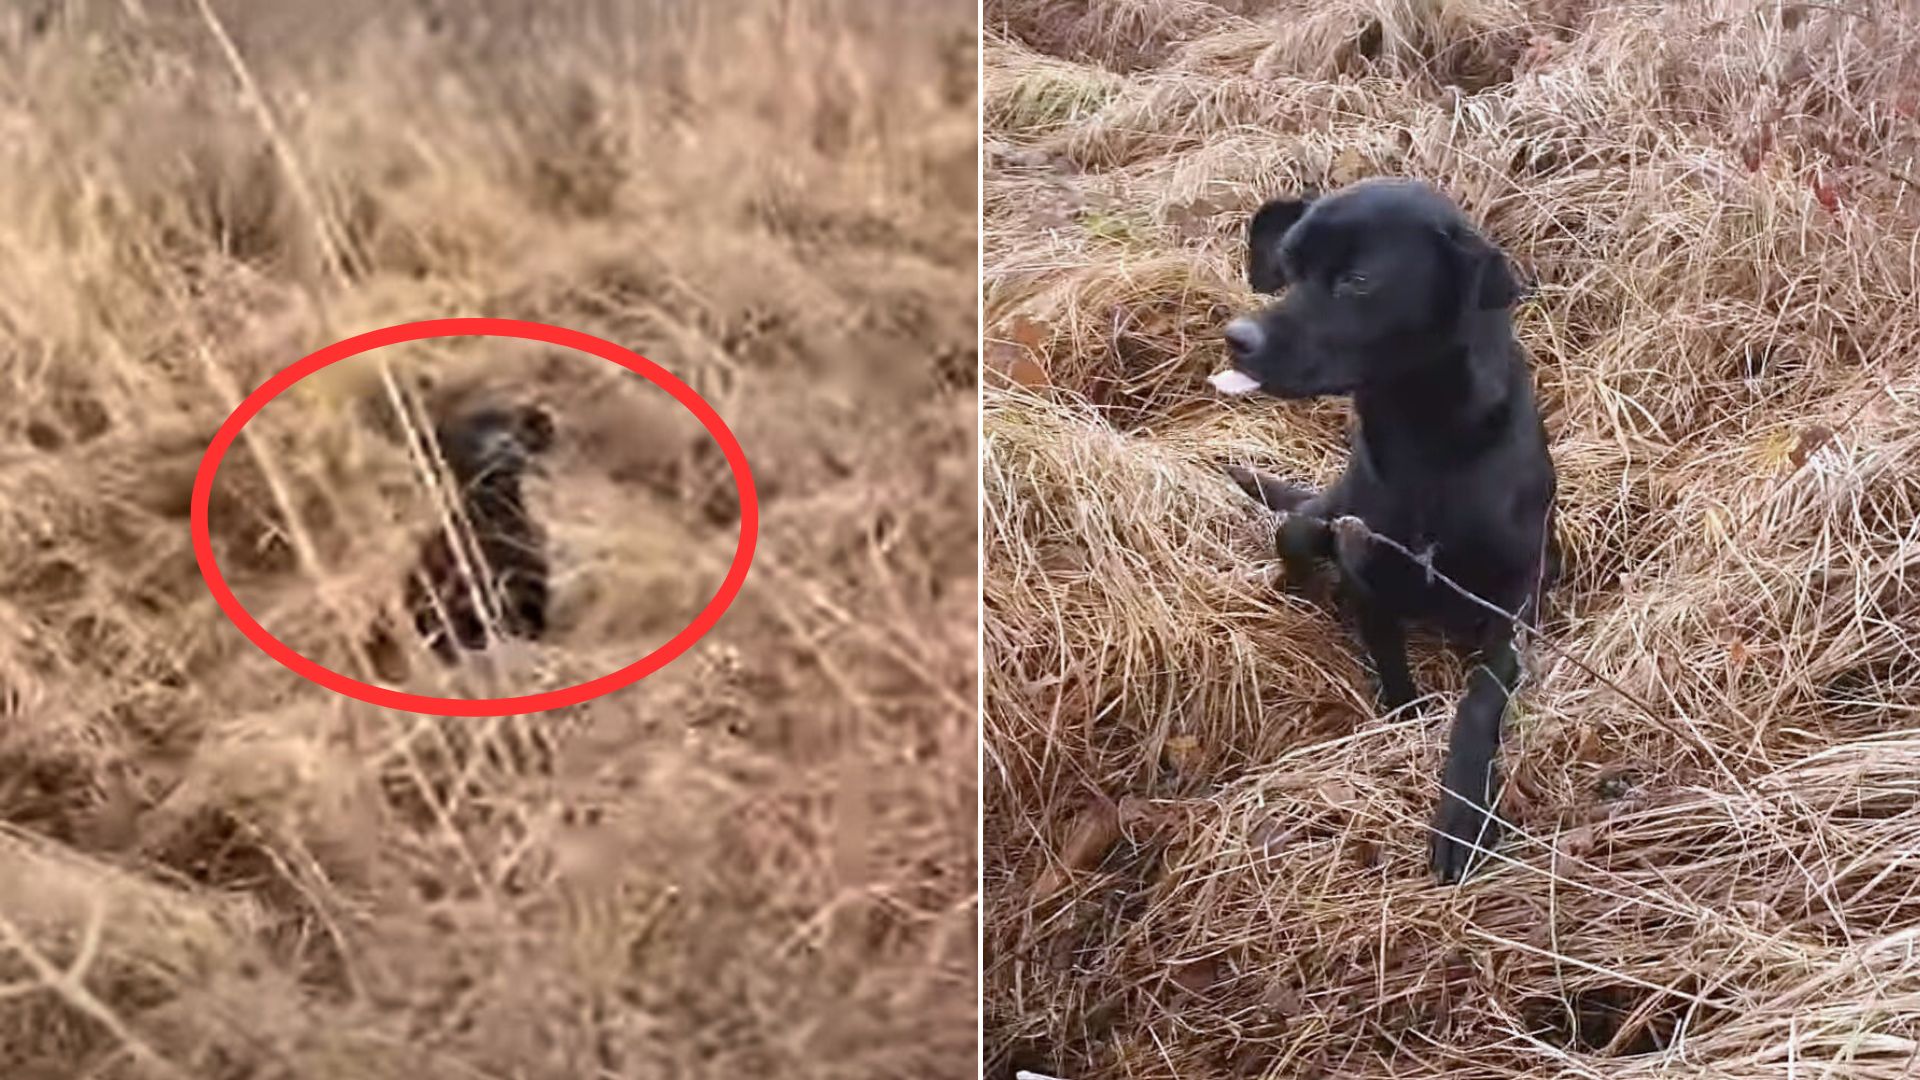 Rescuers Found A Very Sweet Dog Hiding In The Bushes And Went To Help